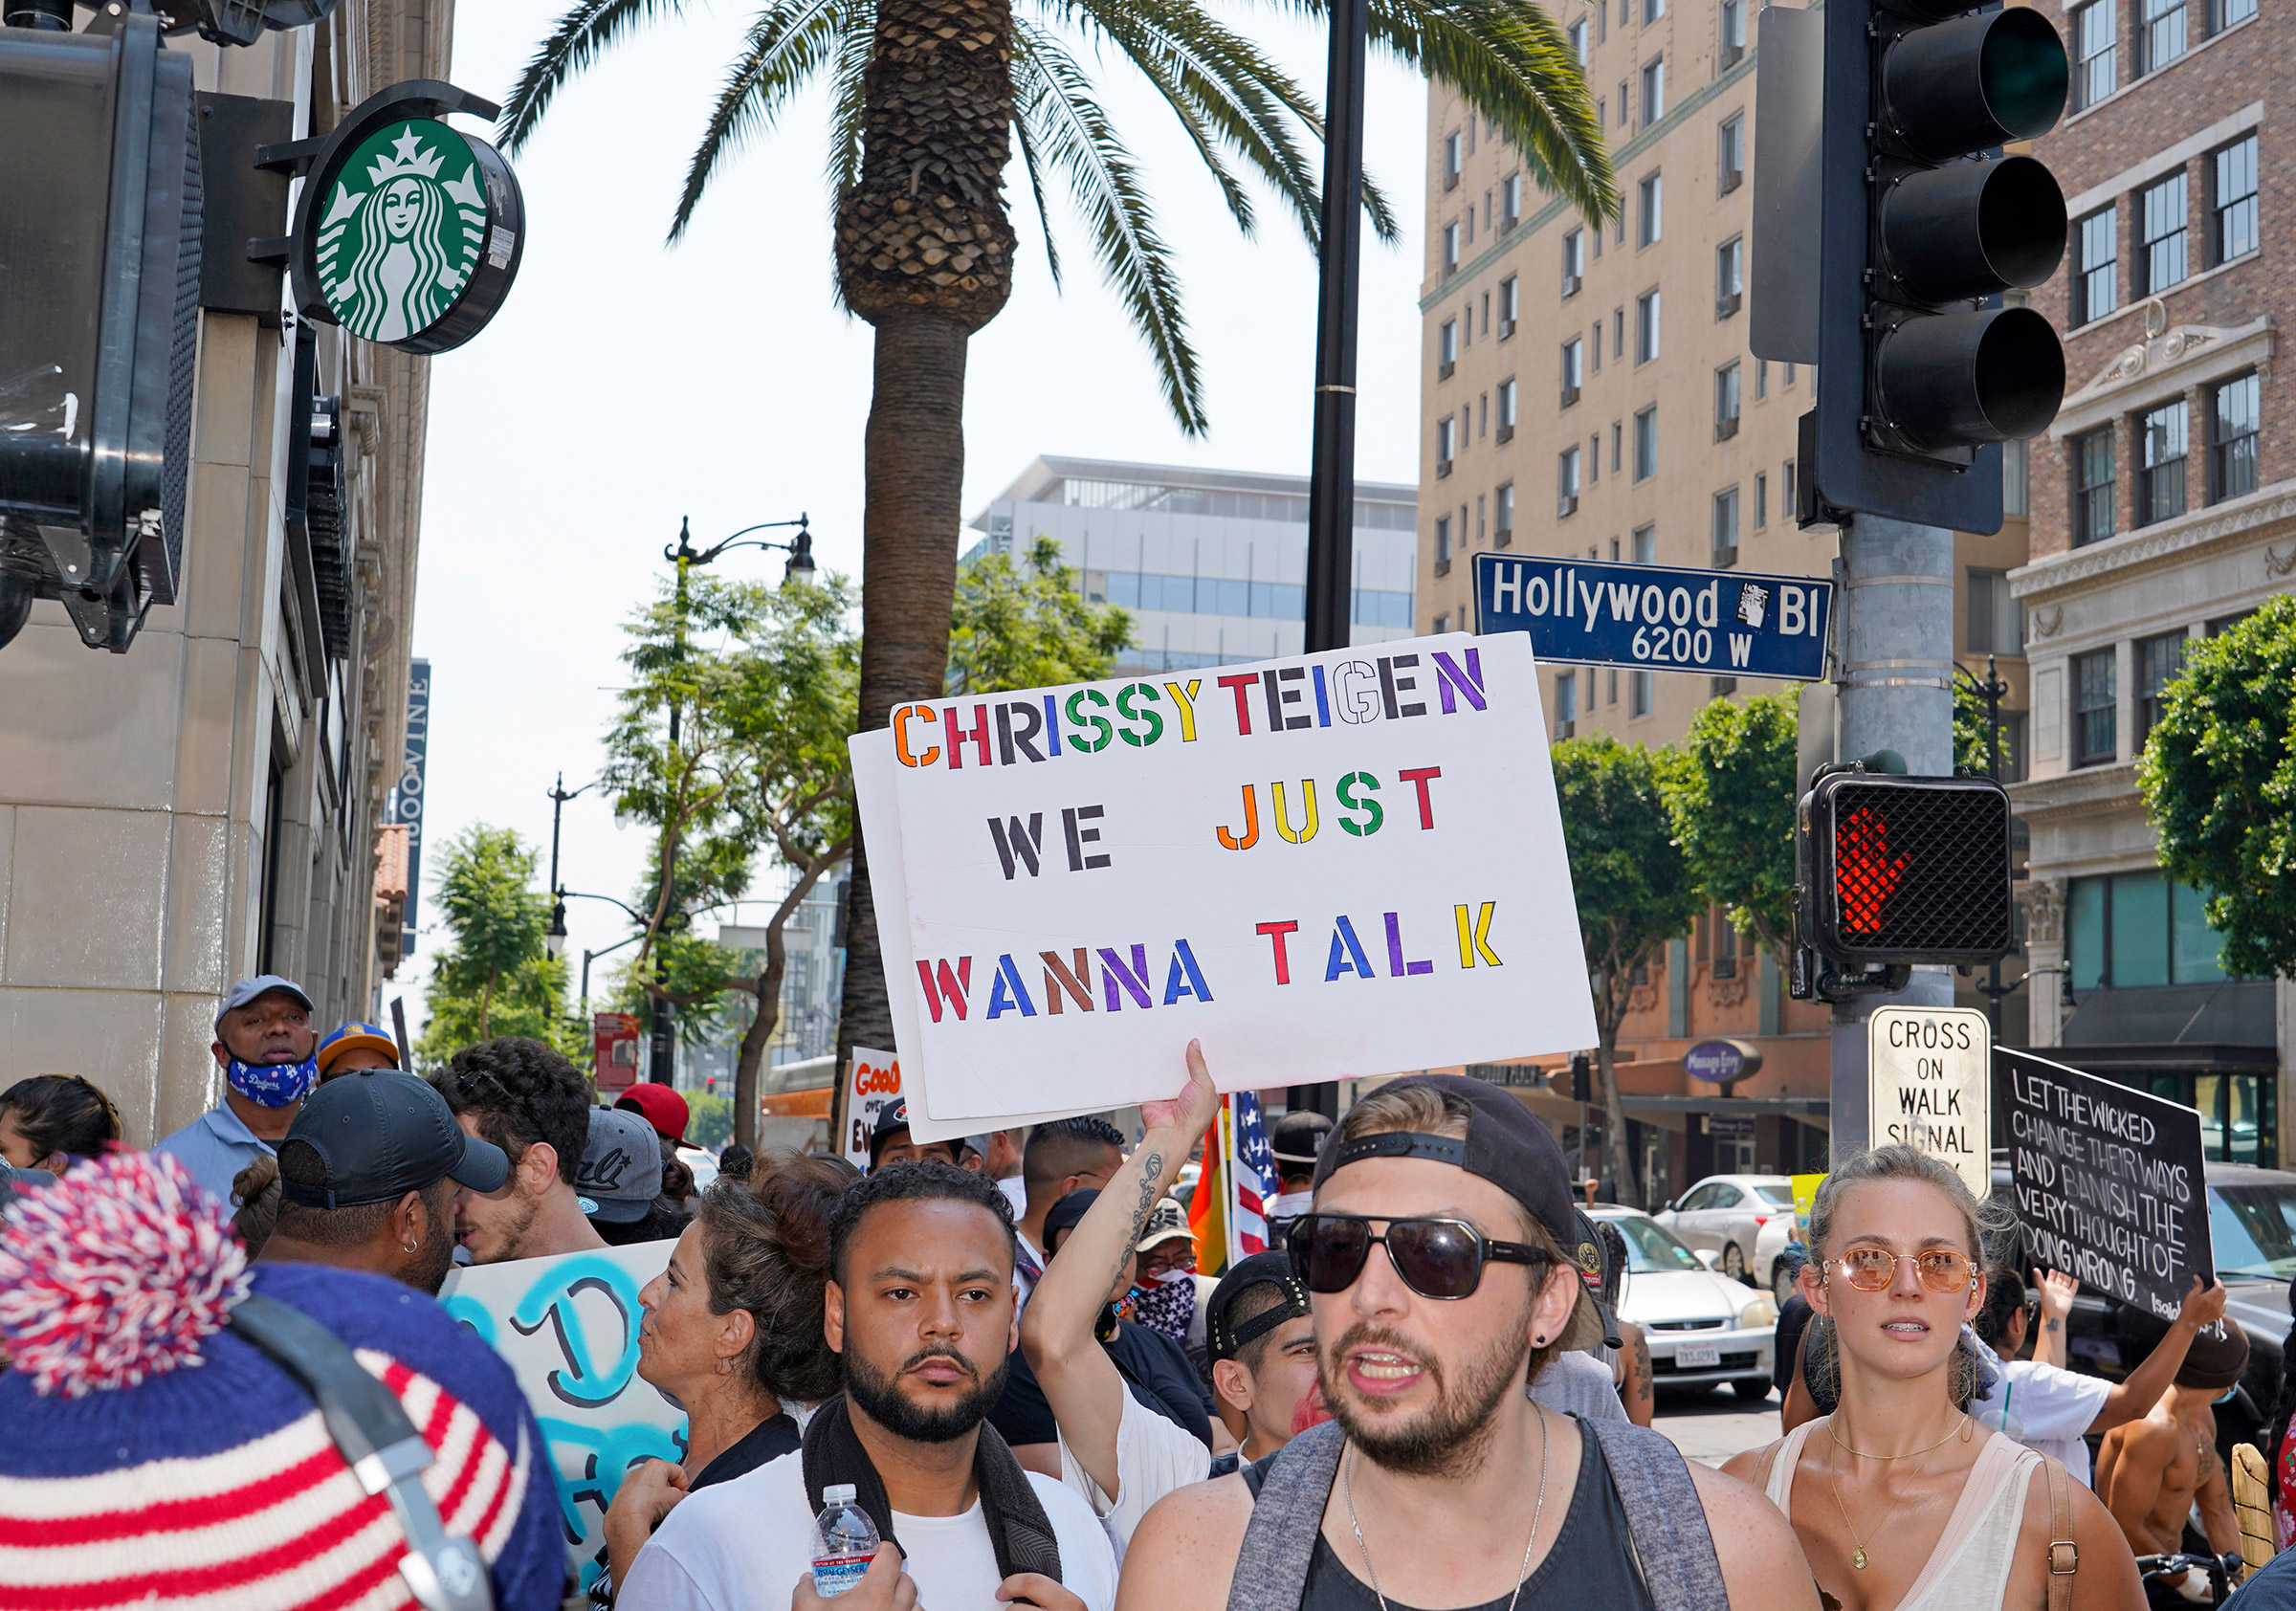 Protesters at a Save Our Children rally in Los Angeles, Aug. 22, 2020. (Jamie Lee Curtis Taete)